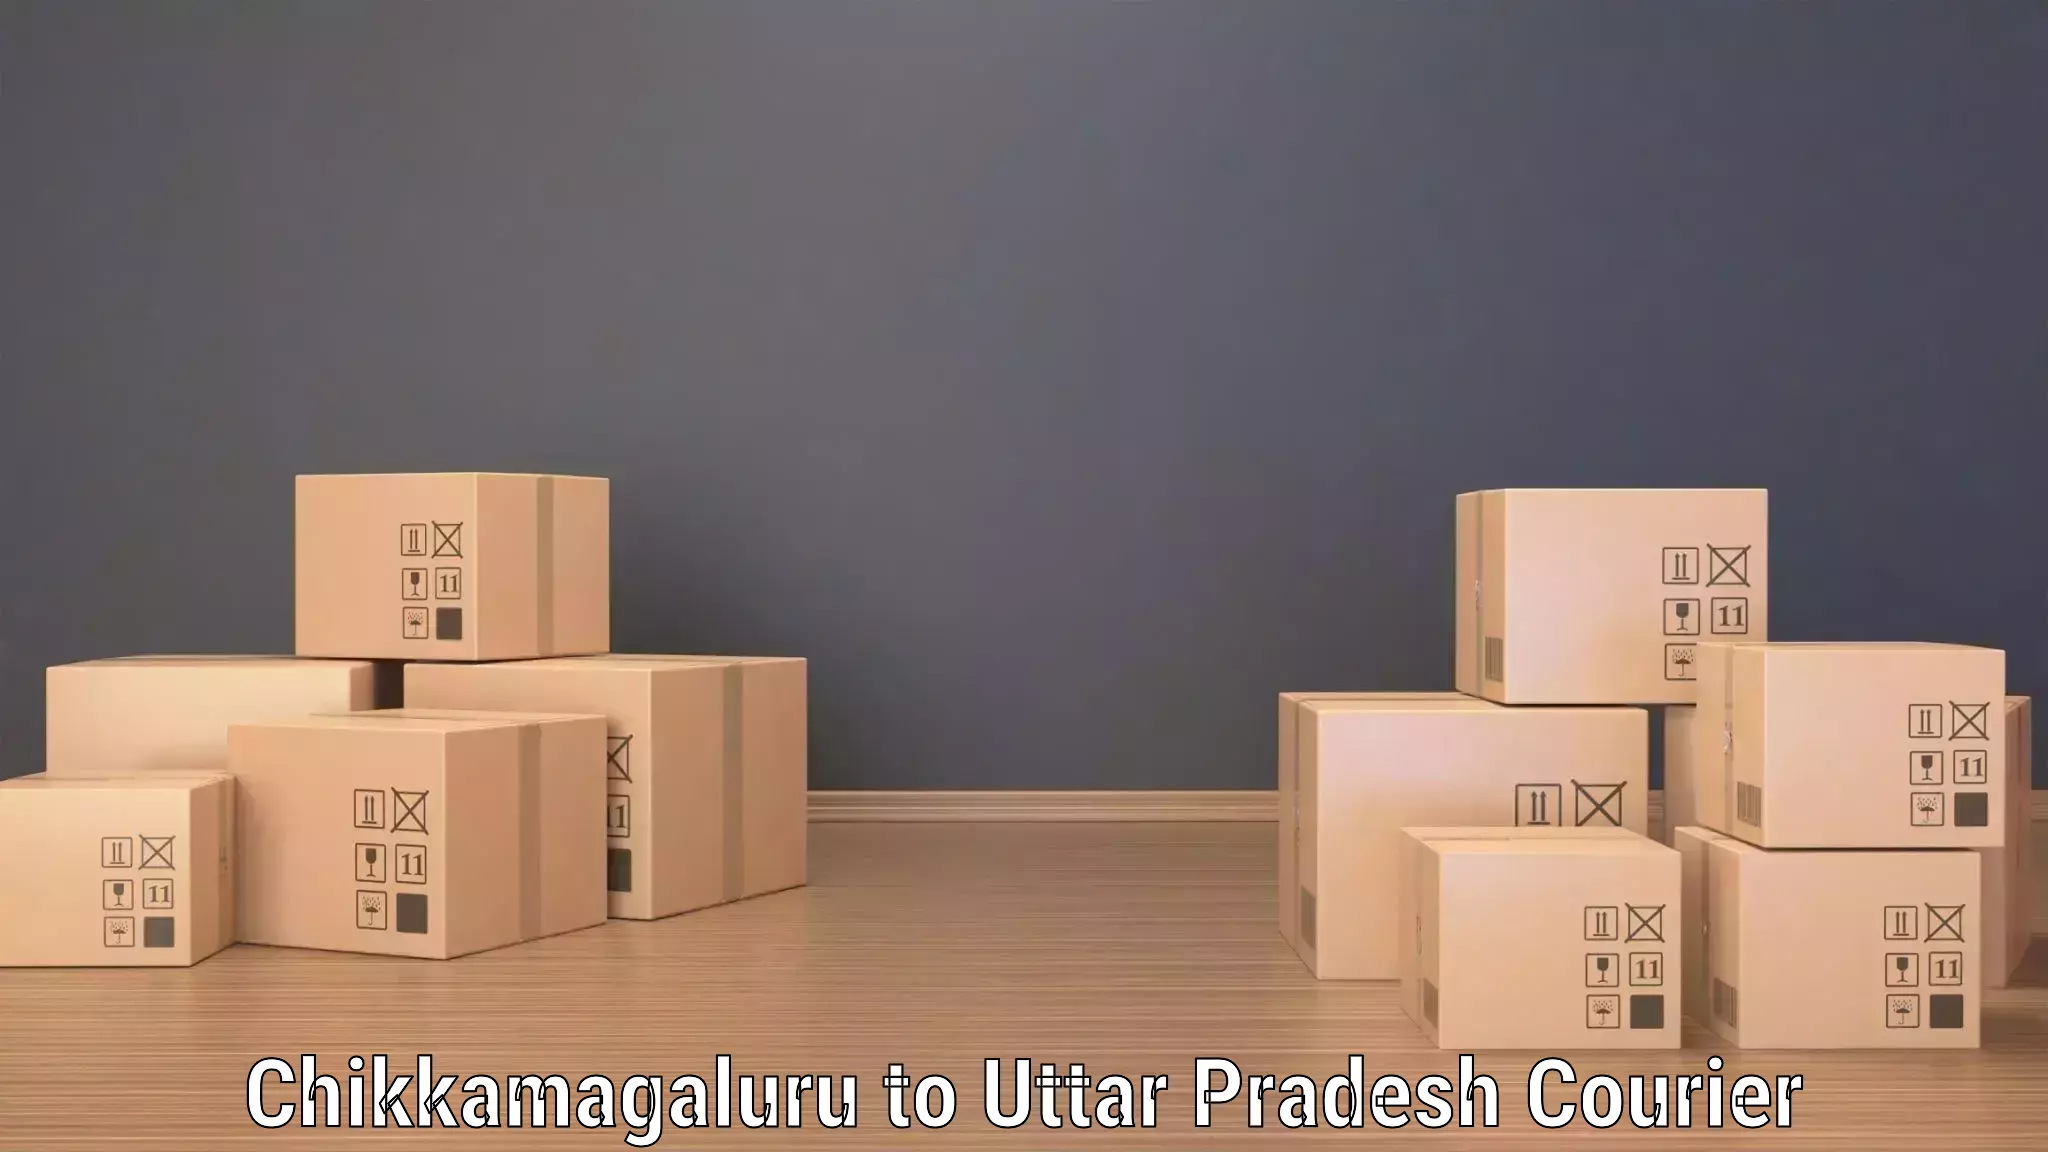 Business delivery service Chikkamagaluru to Behat